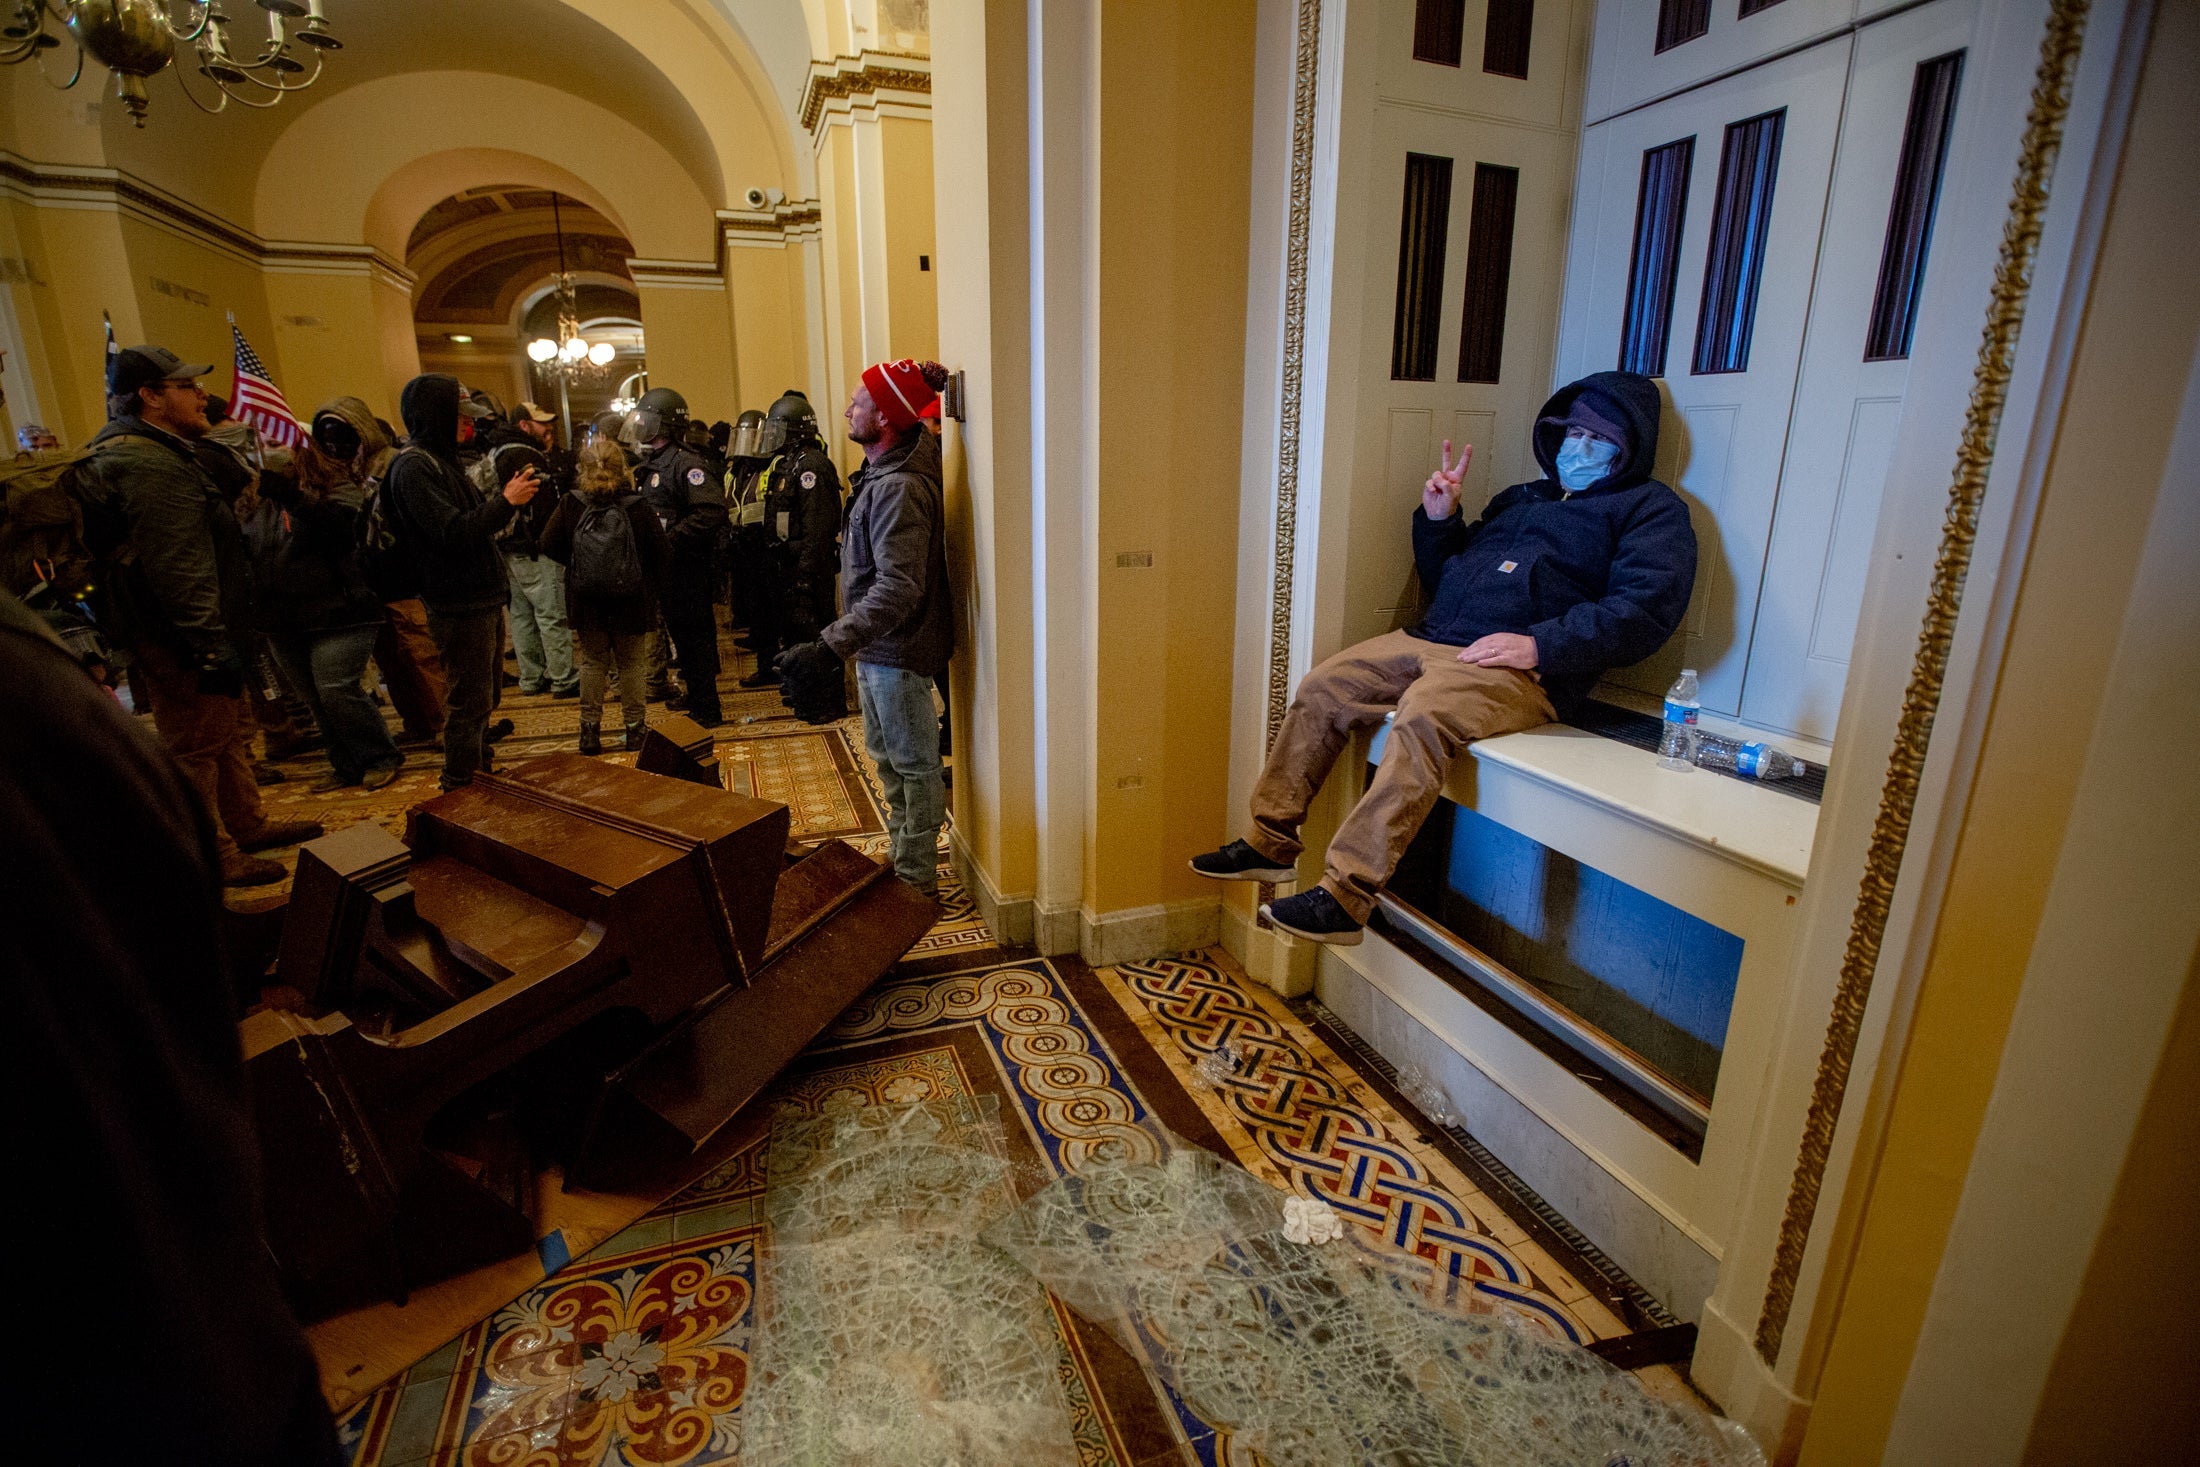 A man sits on a ledge amid a crowd at the Capitol, flashing a peace sign. 